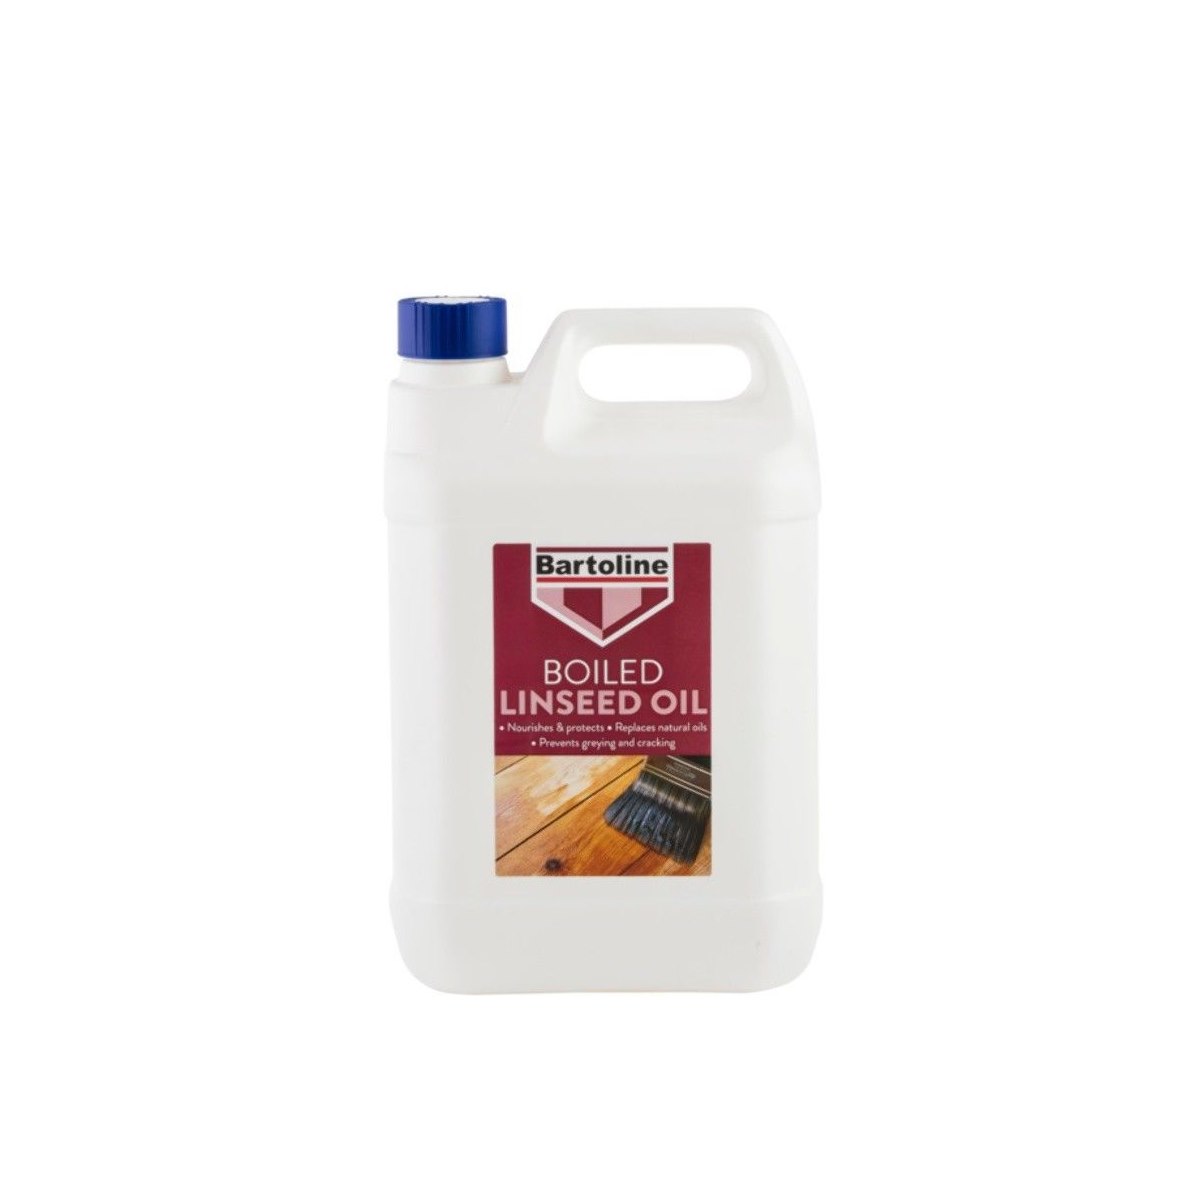 Bartoline Boiled Linseed Oil 5 Litres